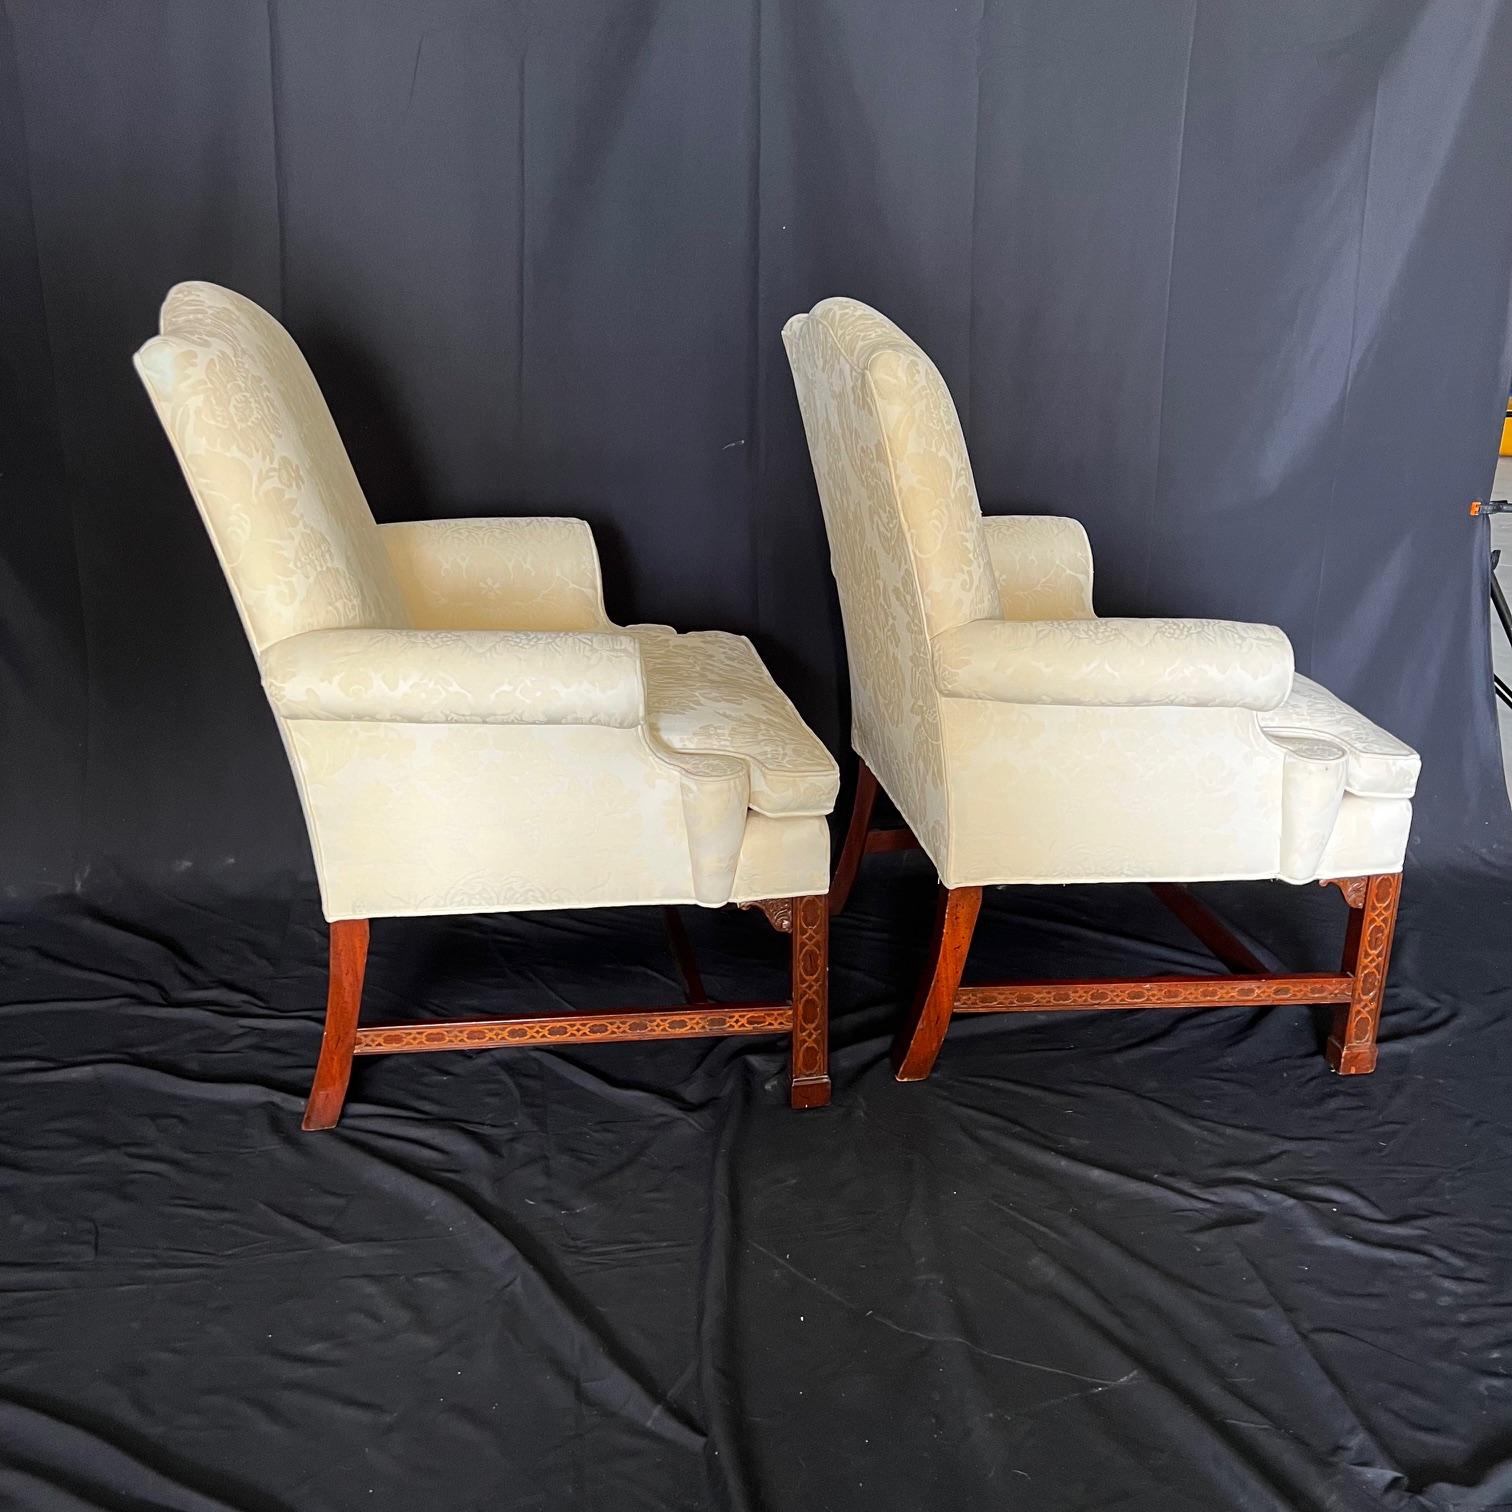  Pair of Classic British Georgian Style Armchairs with Carved Lattice Work For Sale 3